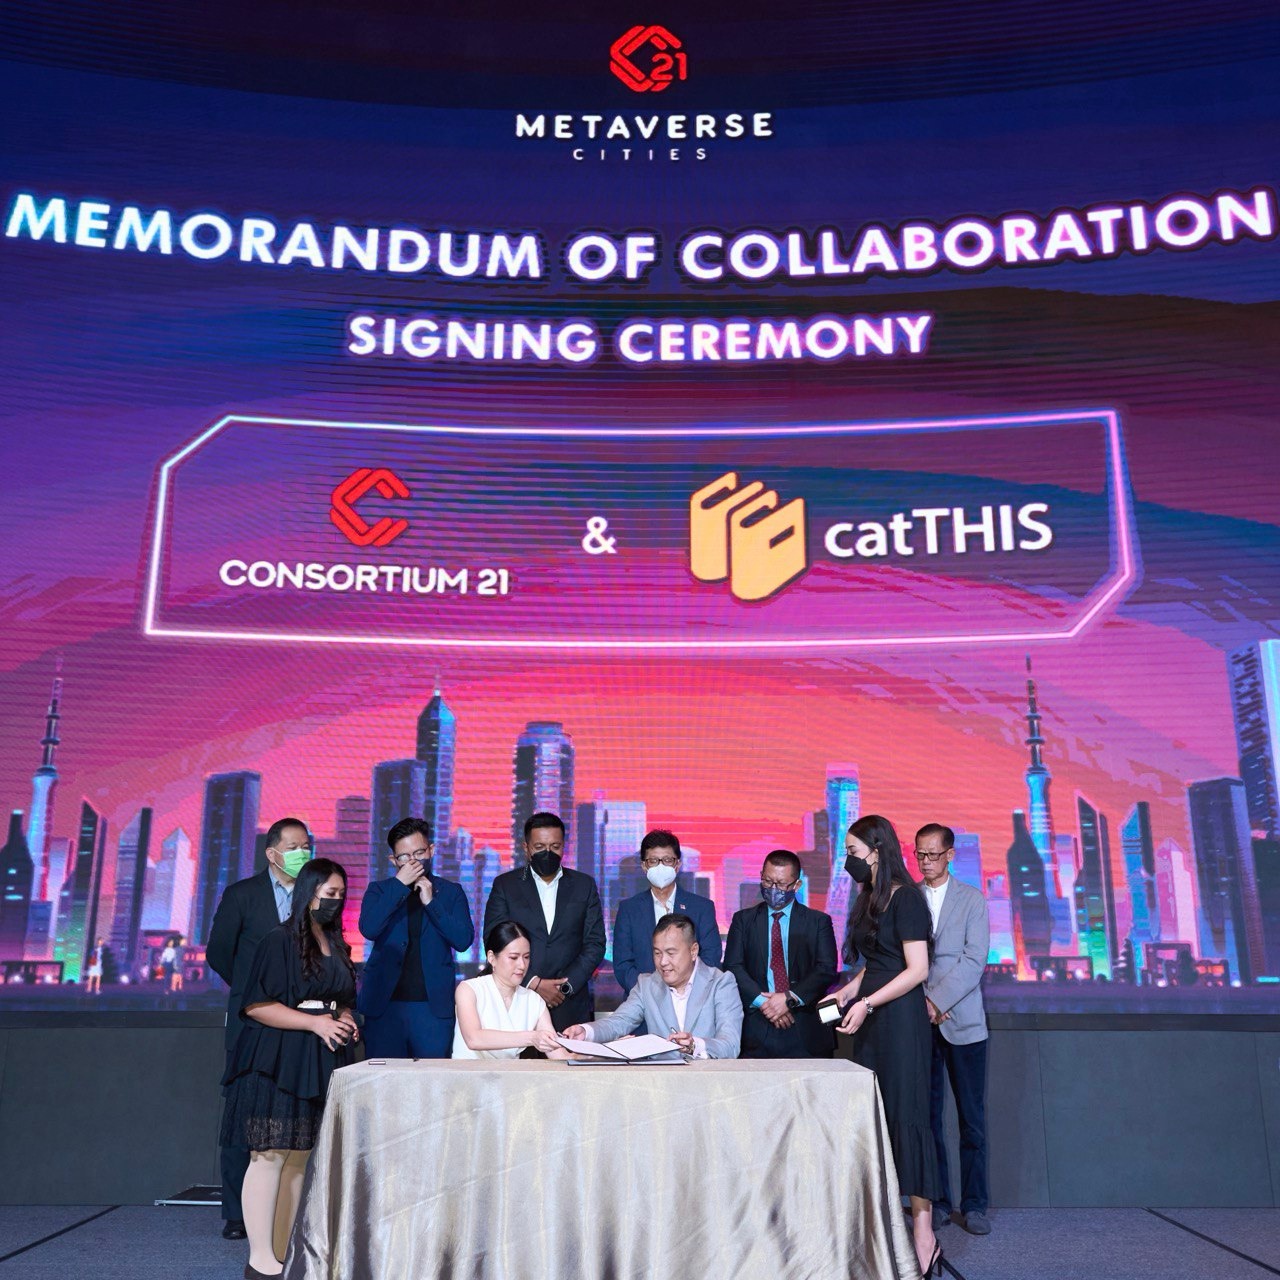 catTHIS is proud to announce our collaboration with Consortium 21 Media Group